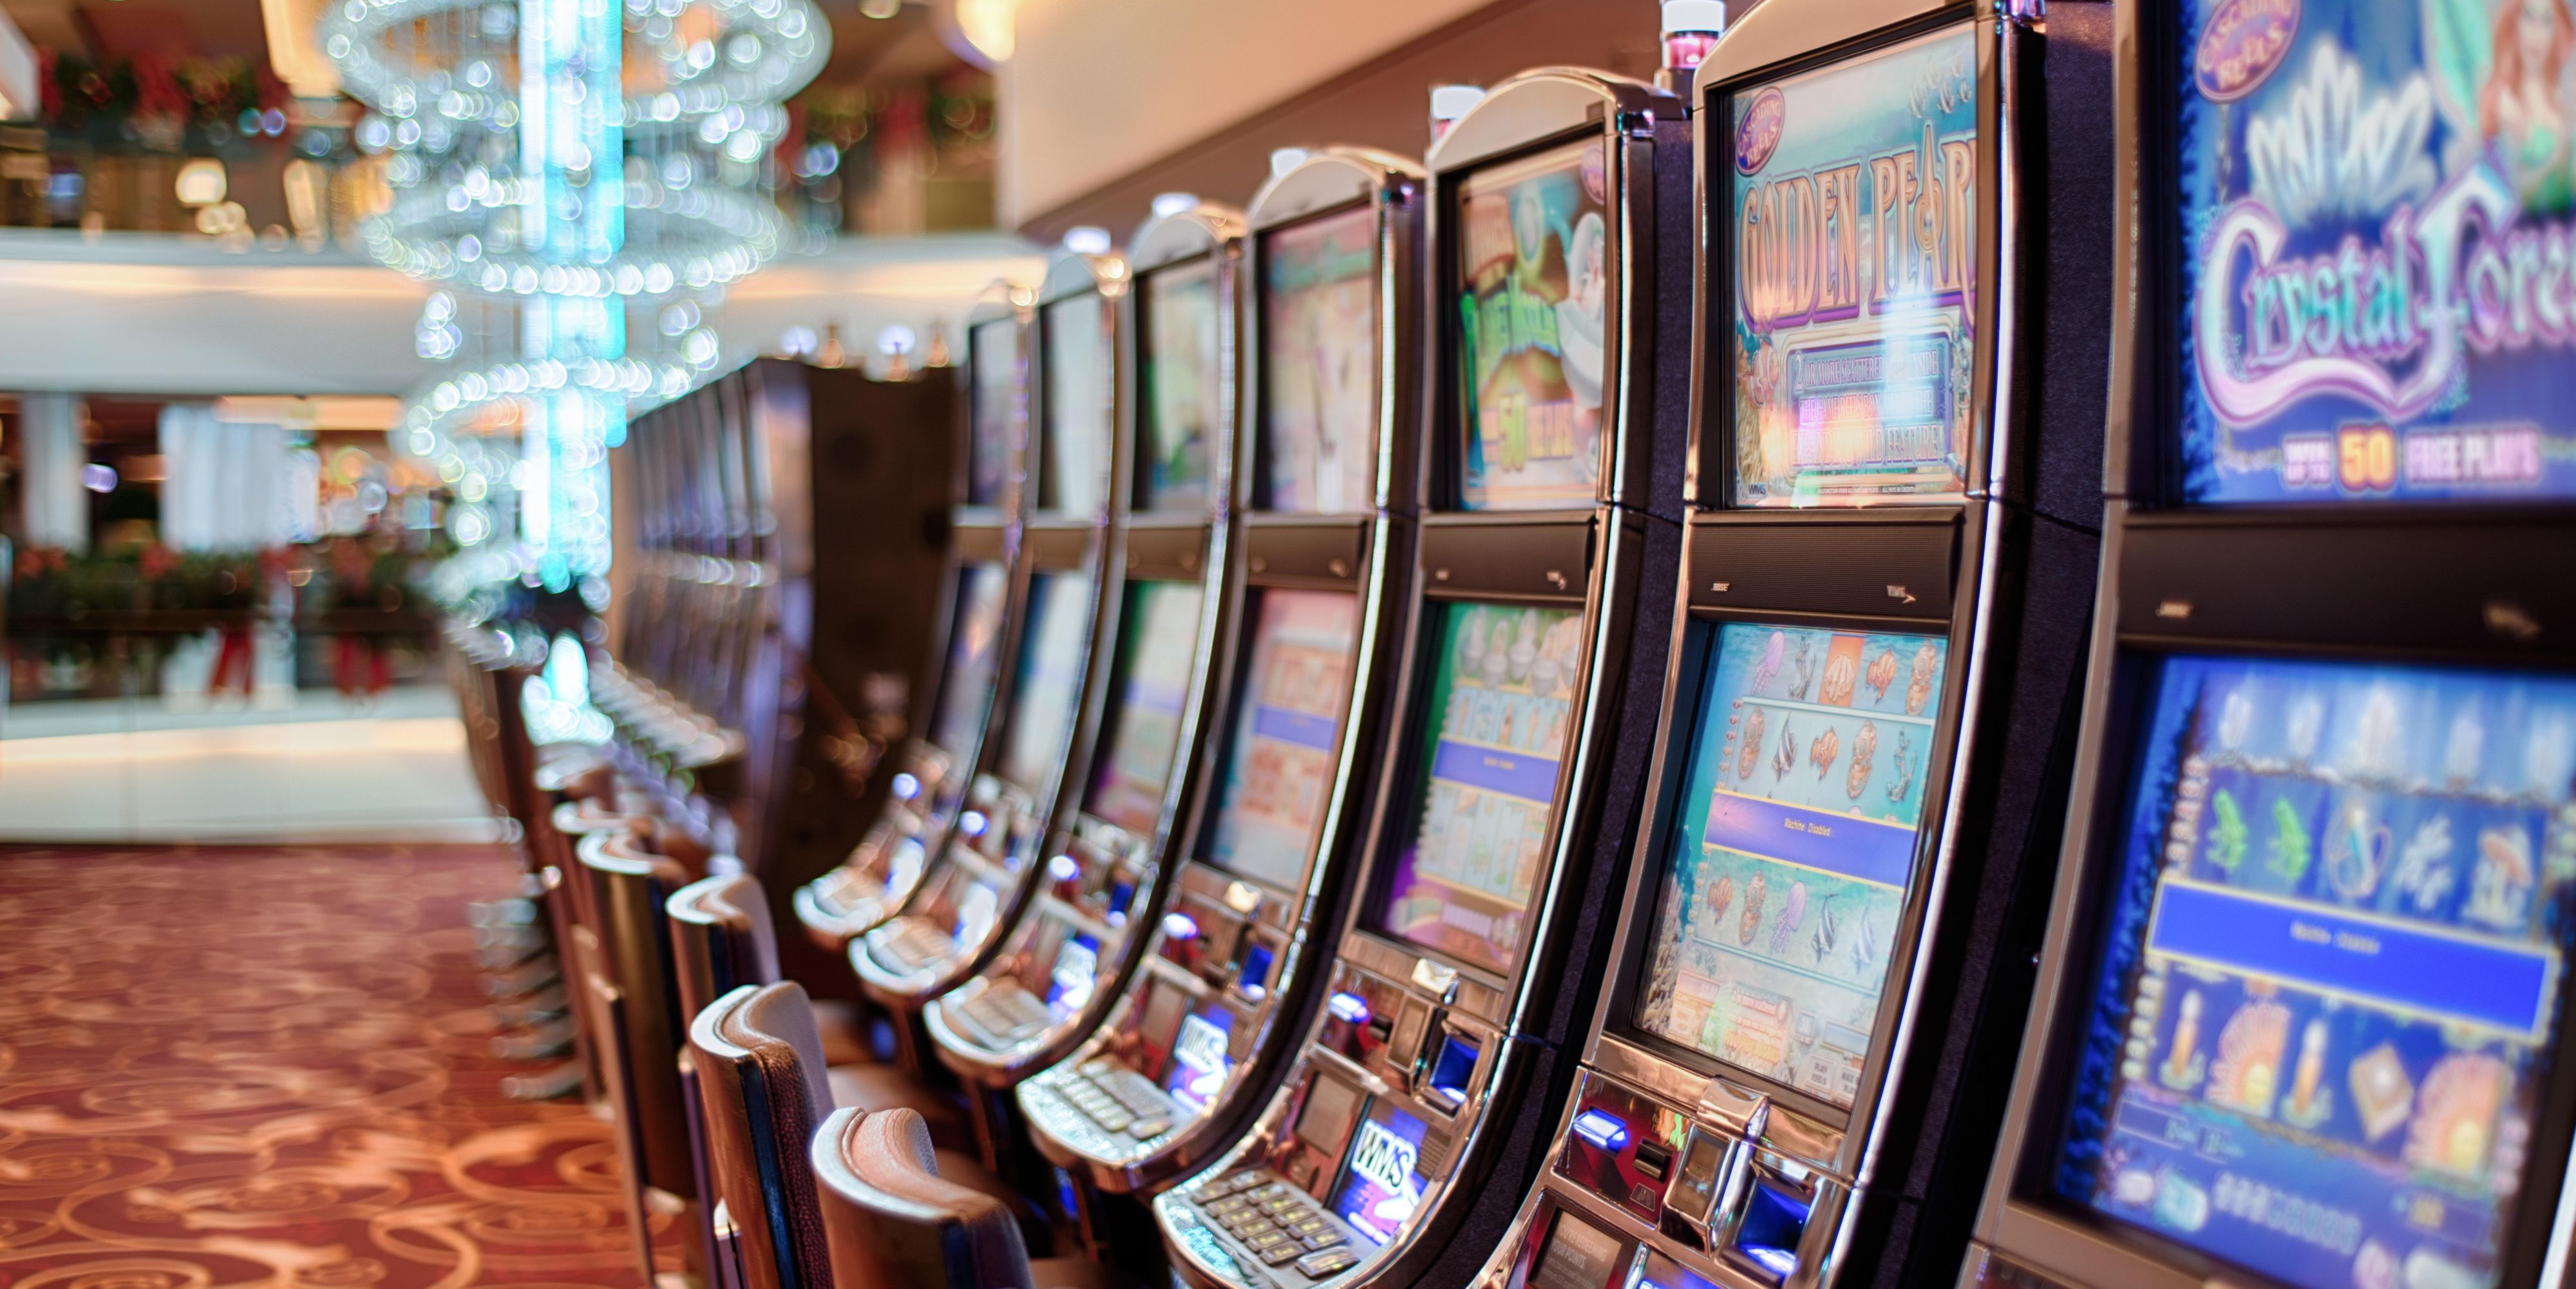 Enjoy over 800 of the latest and greatest slot machines, video poker and more and the popular Comanche Nation Casino.